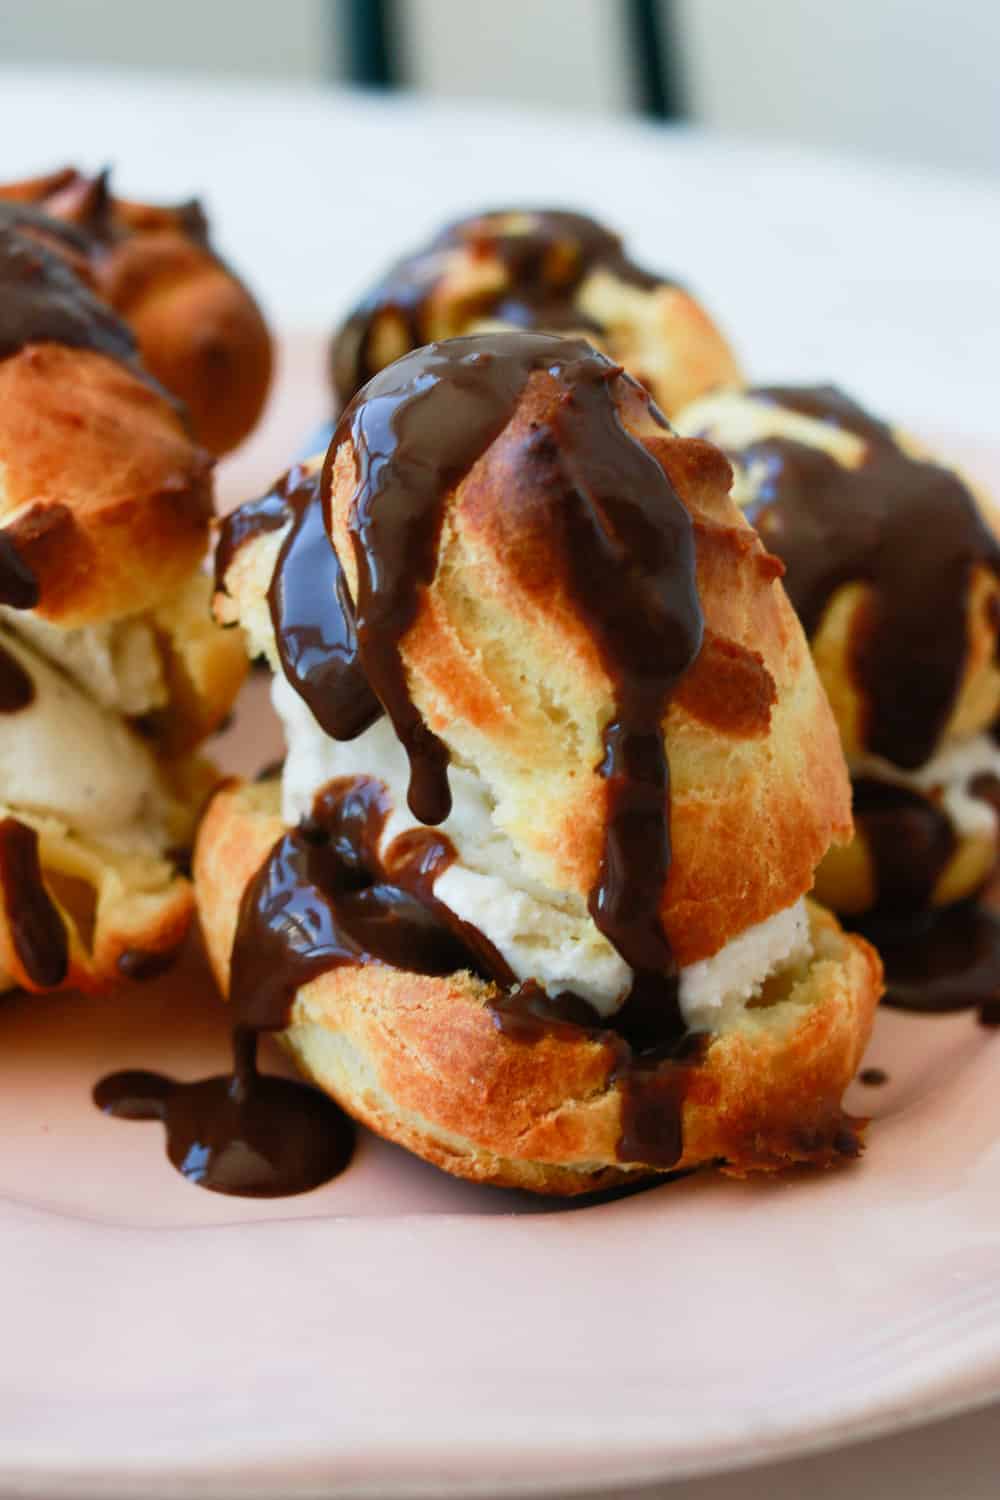 Profiteroles with Chocolate Sauce from Tasting Paris 